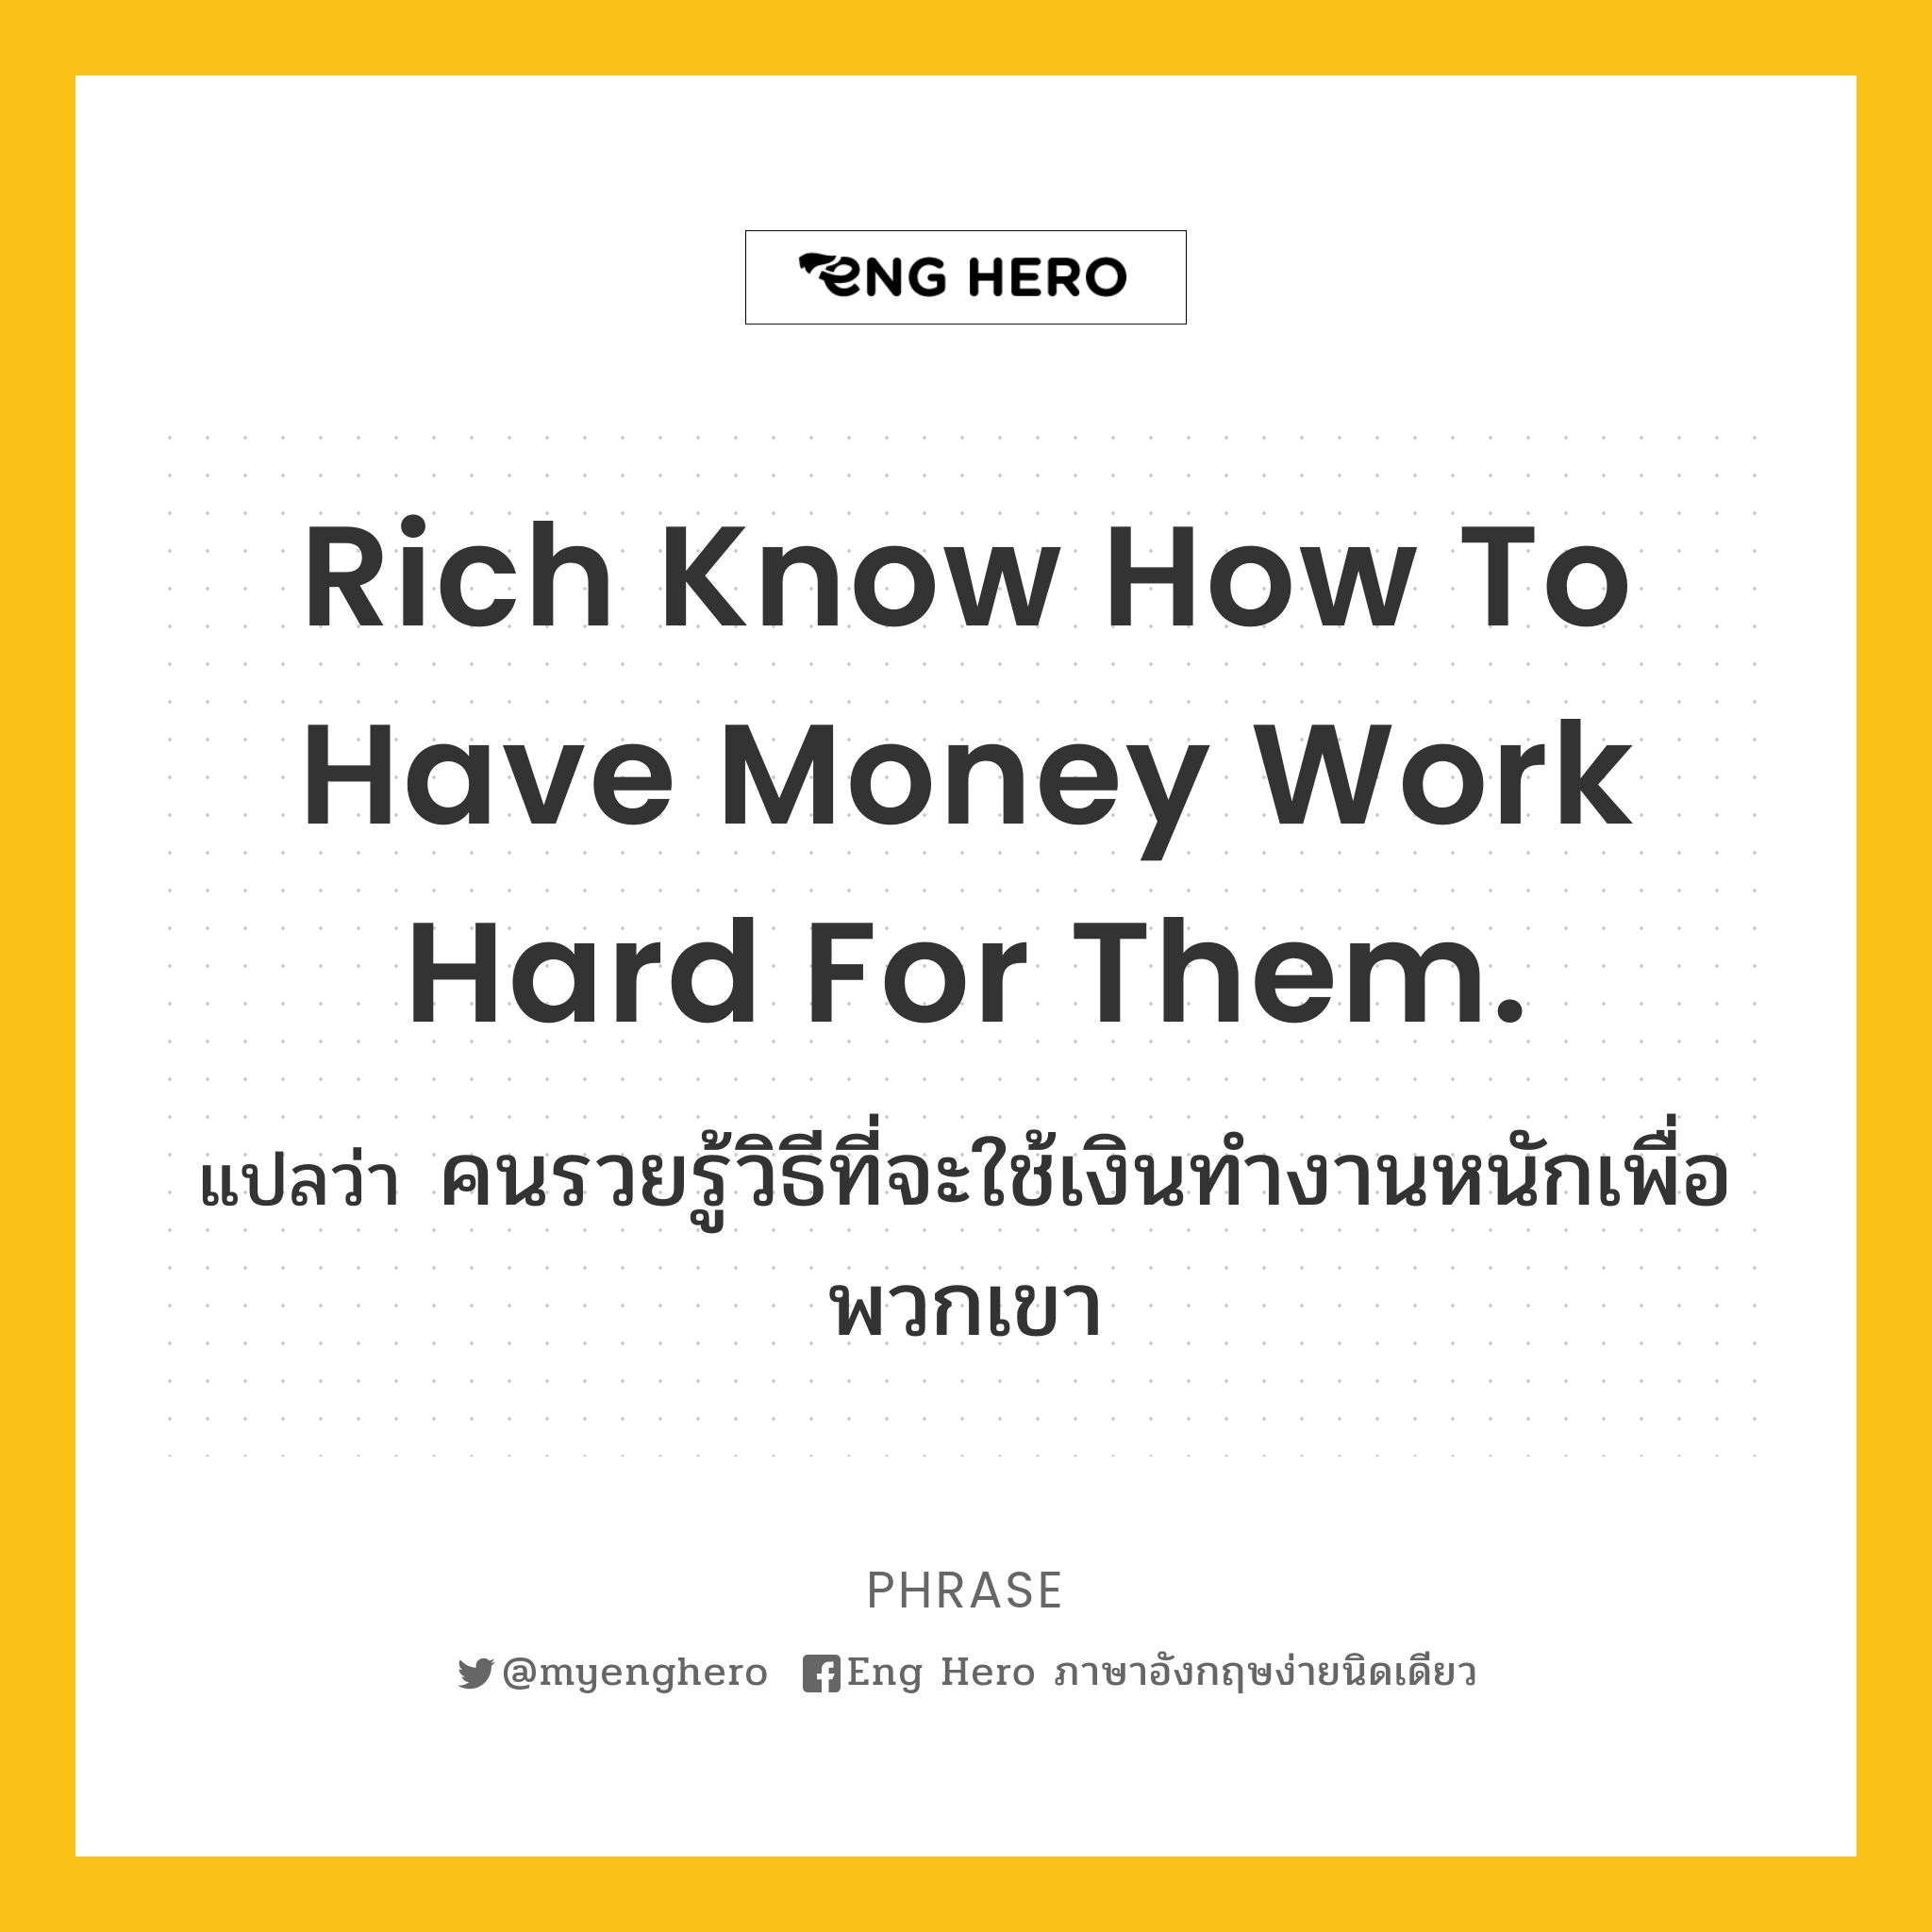 Rich know how to have money work hard for them.